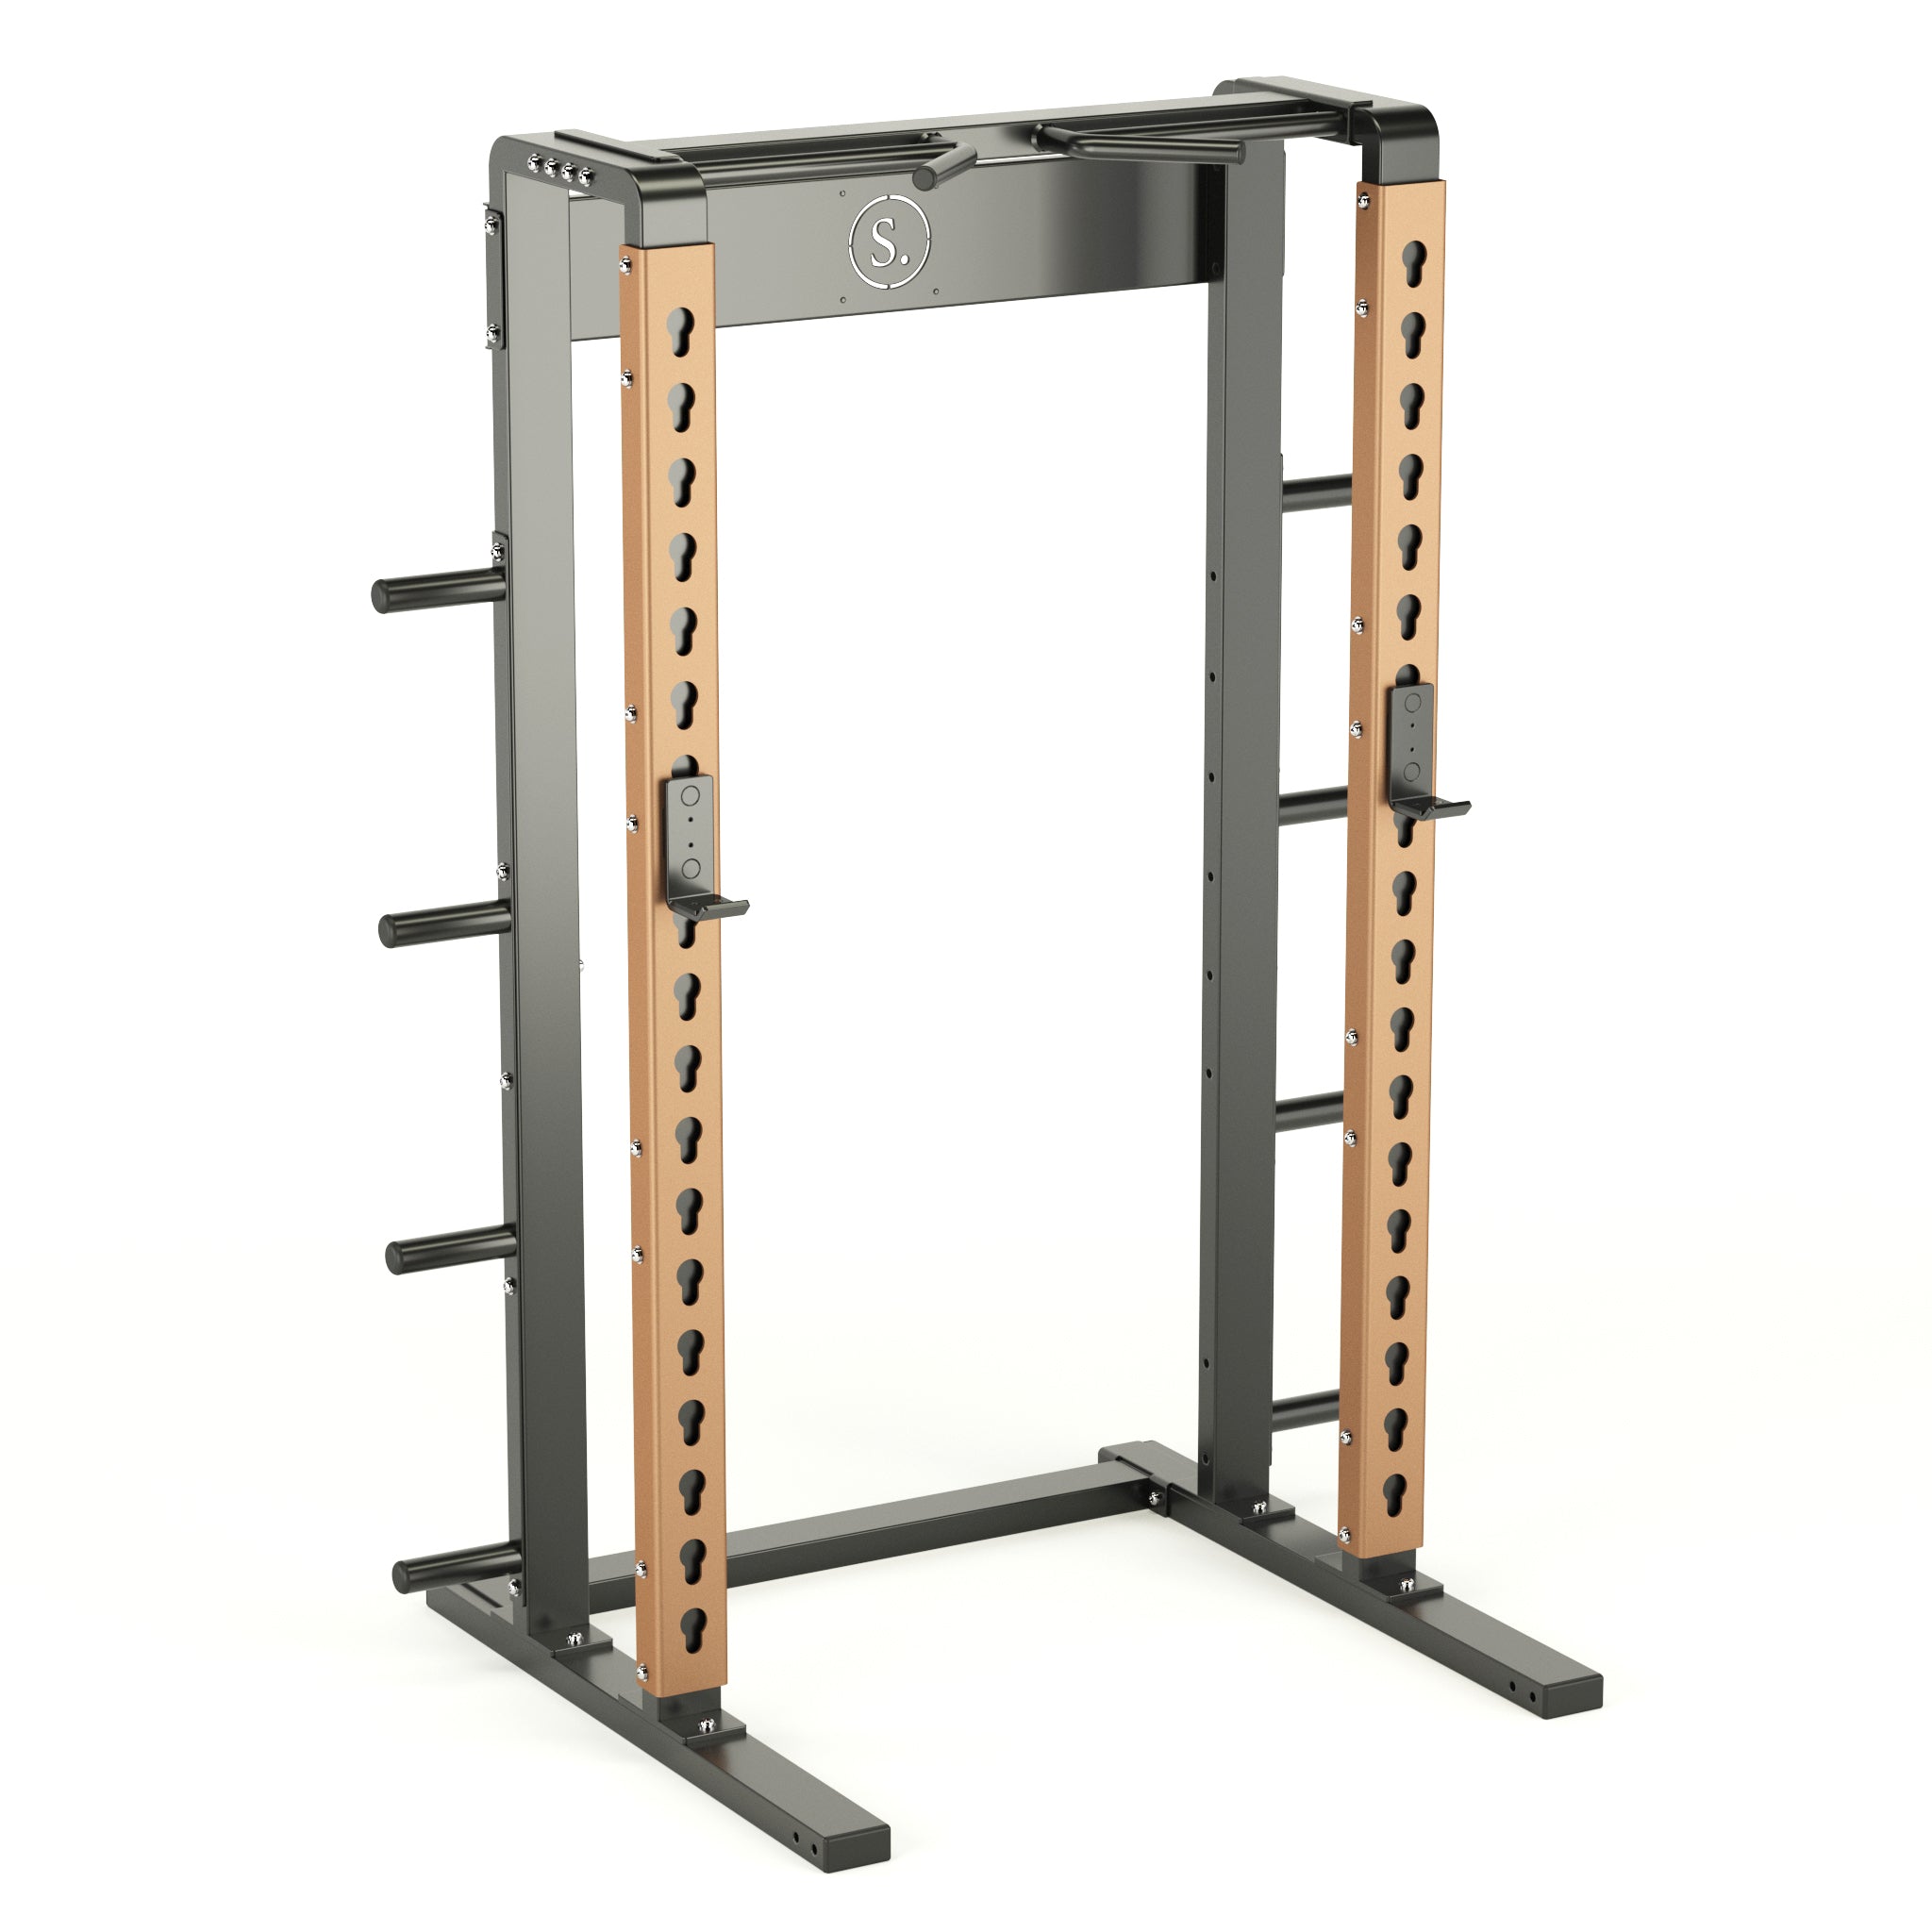 Solo Squat Rack in bronze with multi-grip pull-up and weight horns